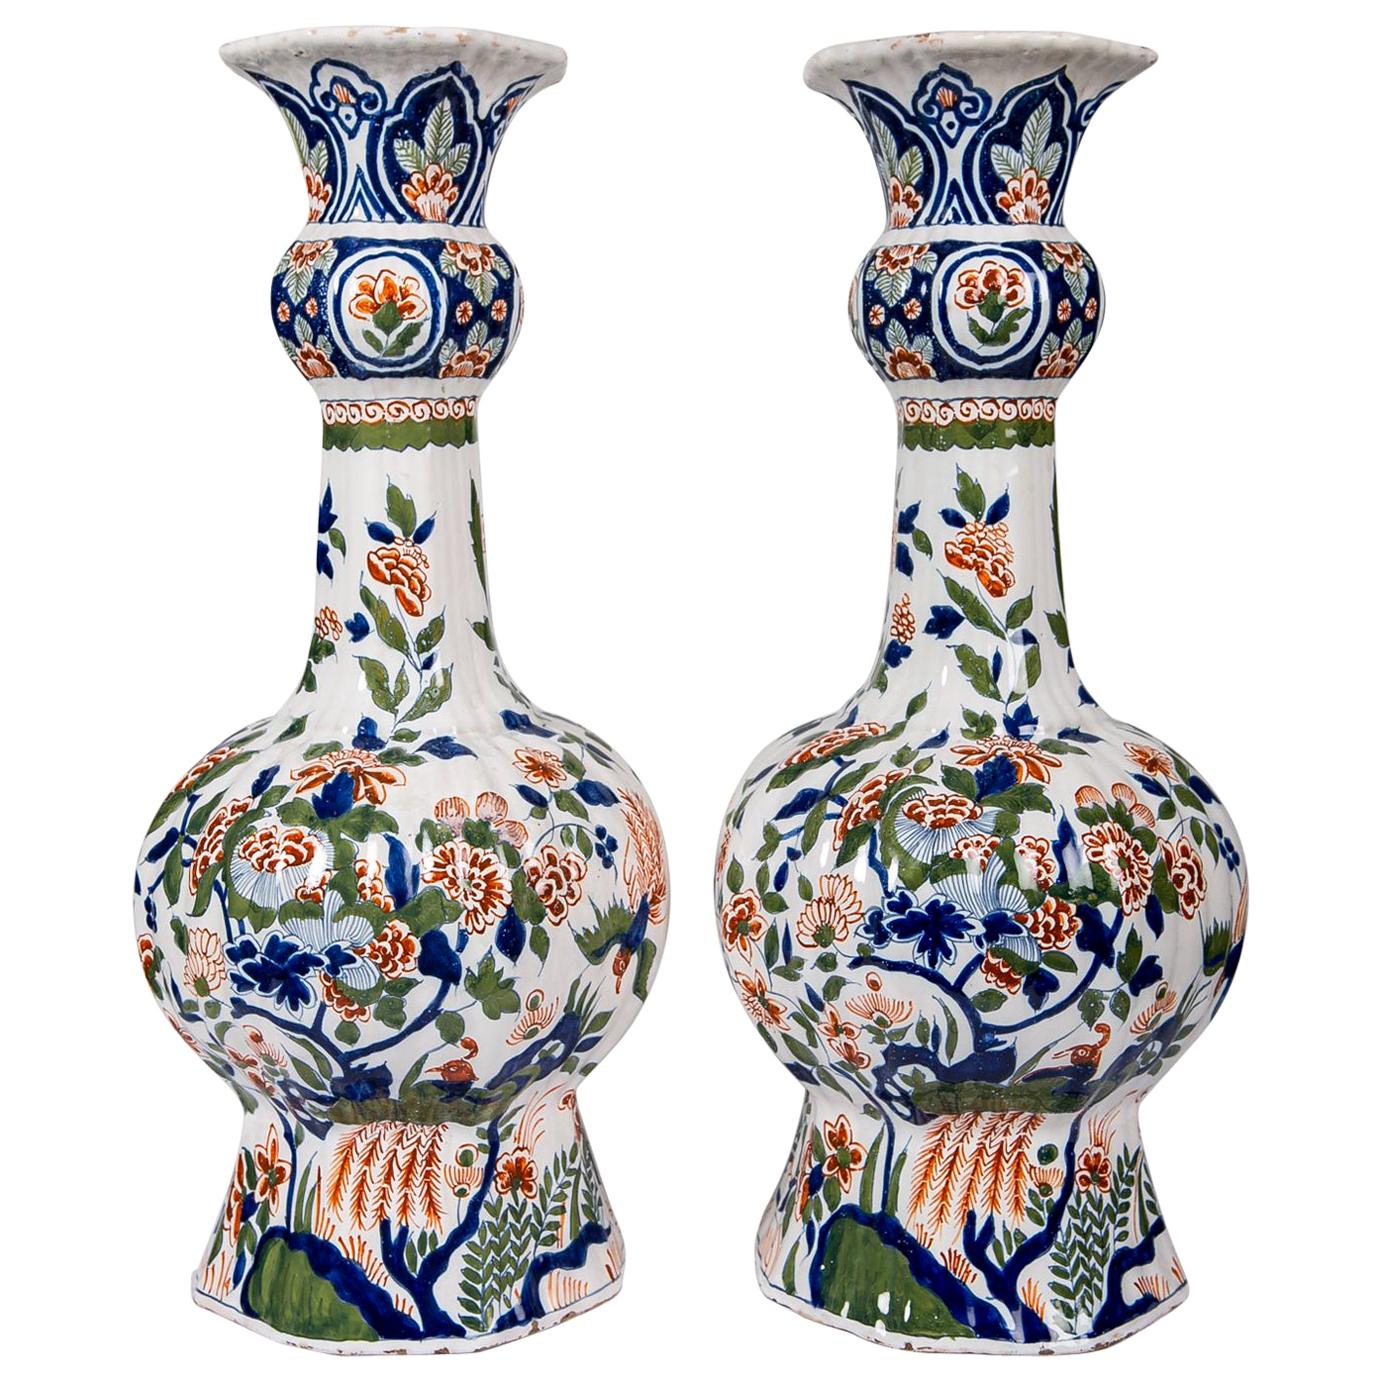 Pair Large Dutch Delft Vases Hand-Painted Circa 1800 Made by "The Claw"